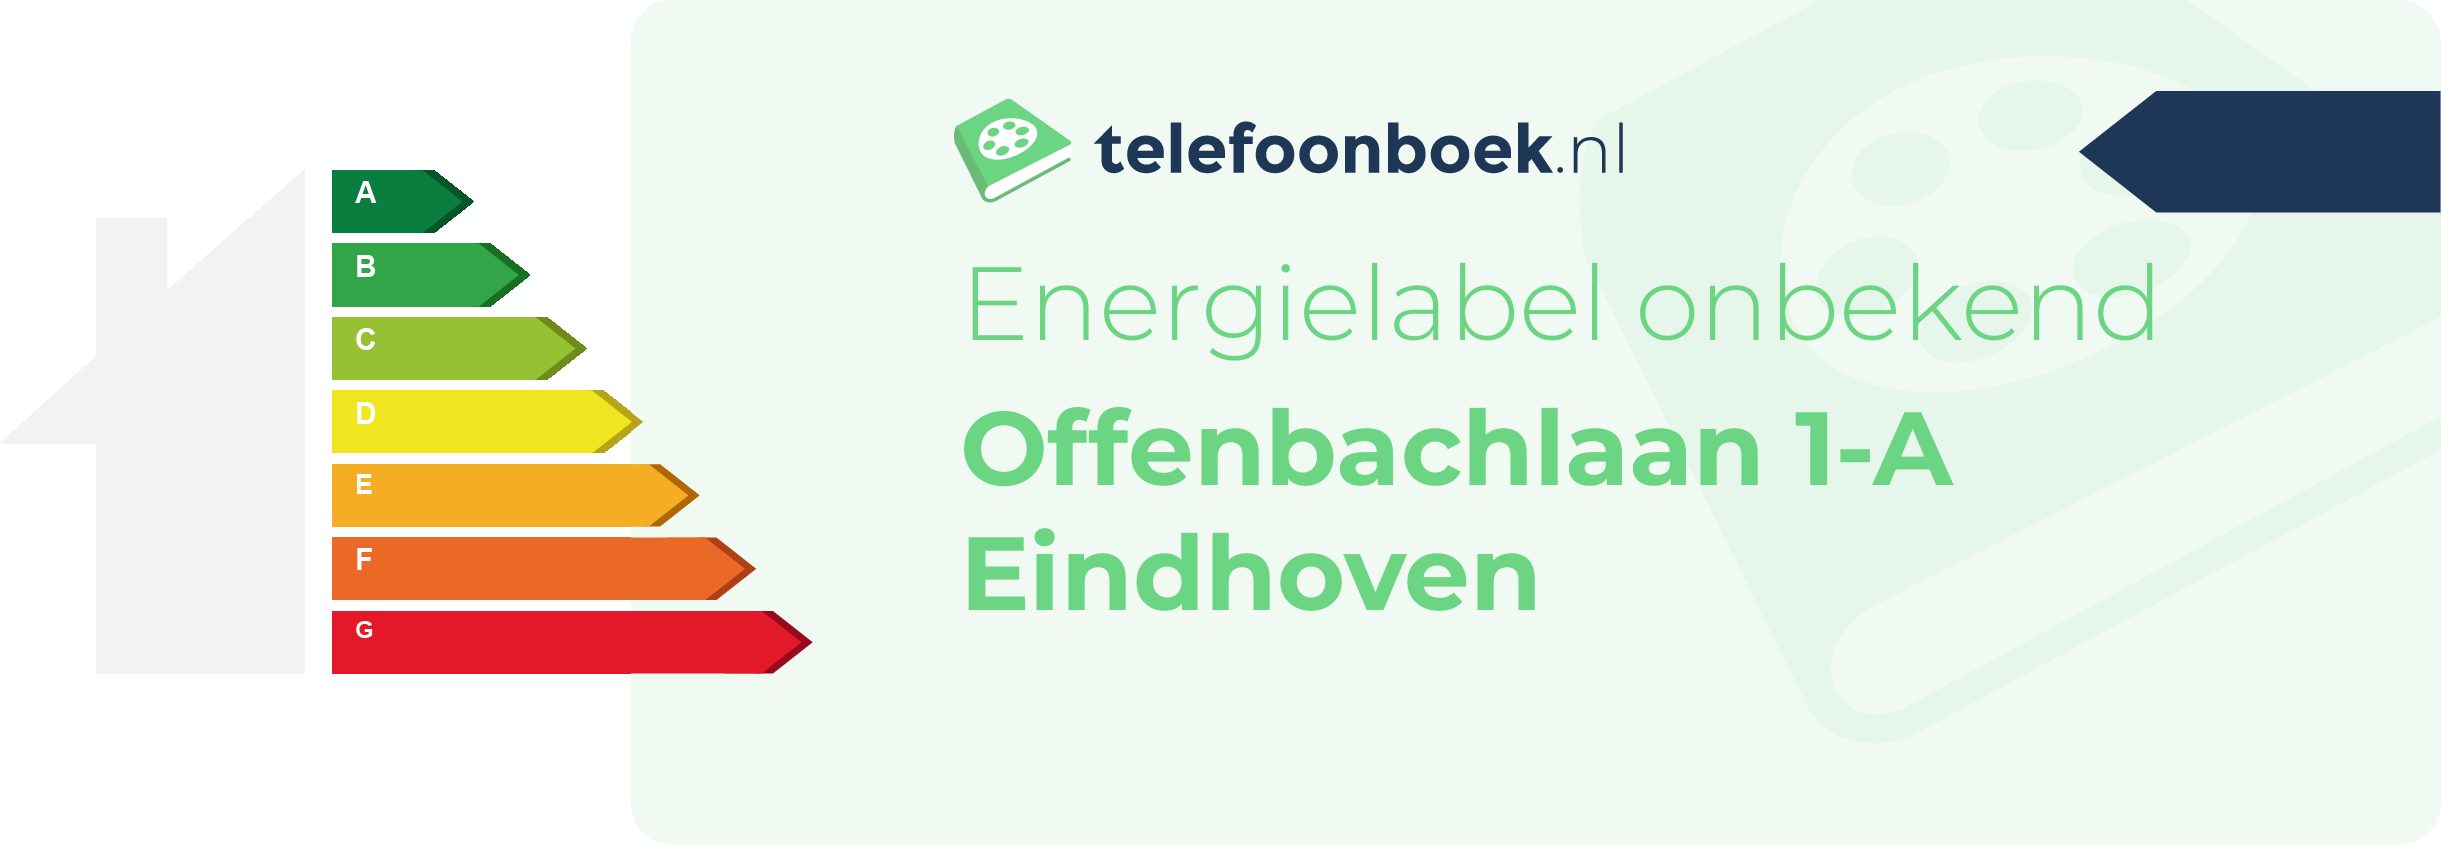 Energielabel Offenbachlaan 1-A Eindhoven